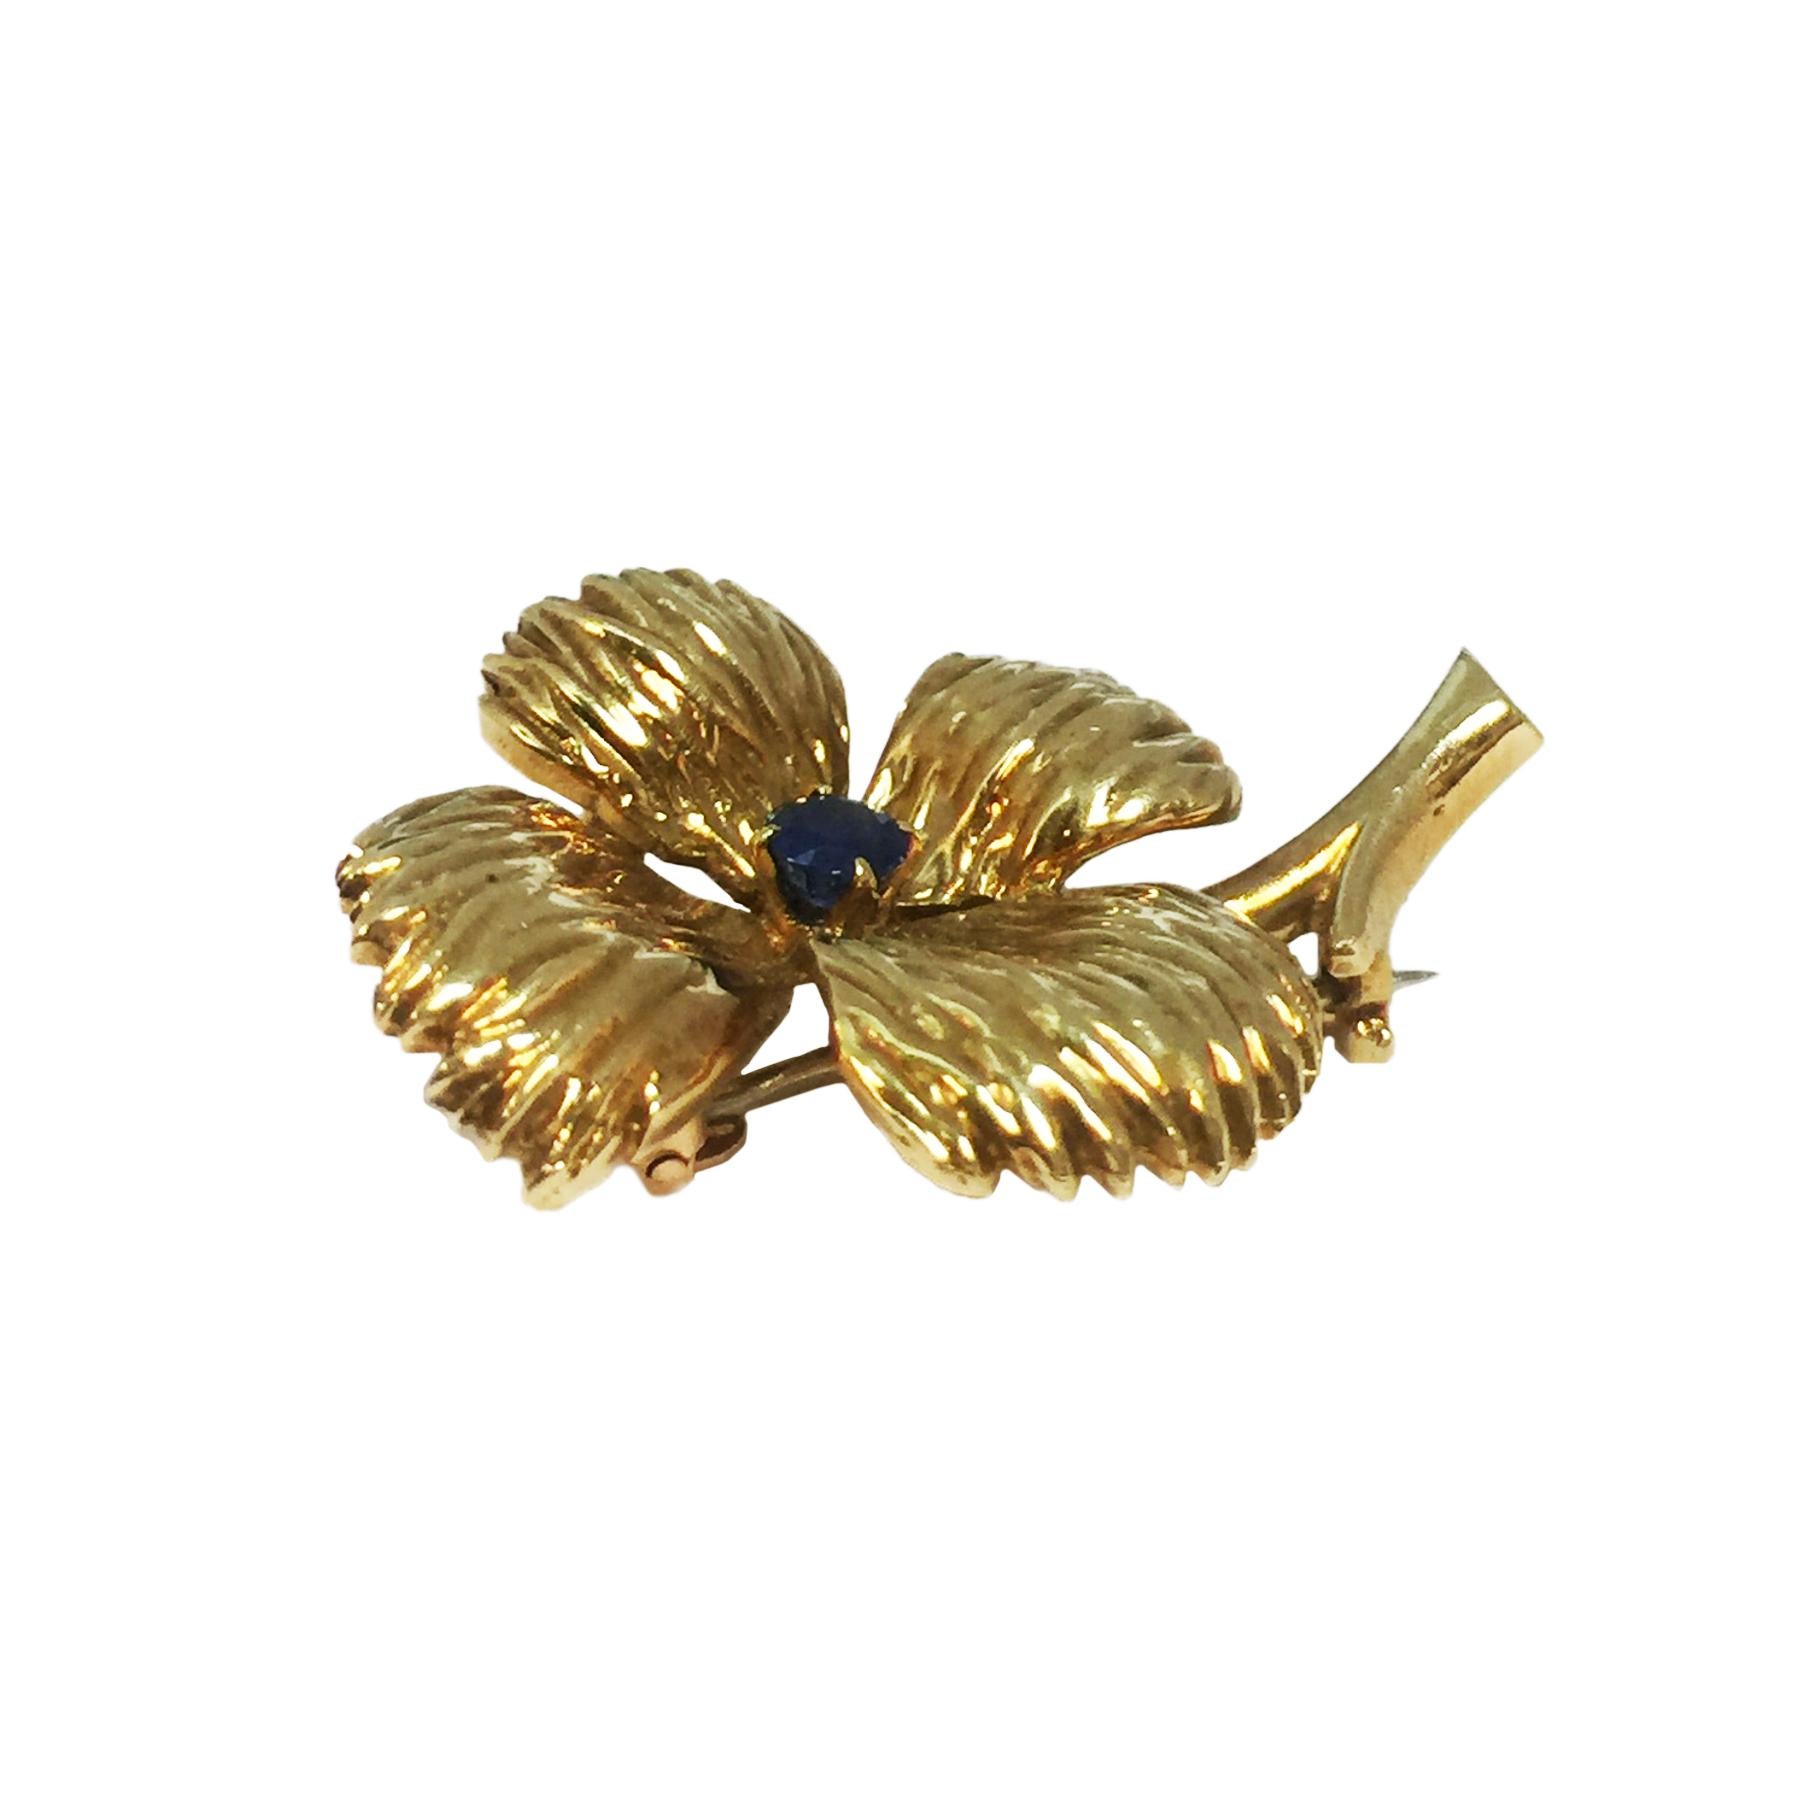 Circa 1960 Van Cleef & Arpels Paris, 18K yellow Gold Flower Clip Brooch, measuring 1 1/8 X 7/8 inch and centrally set with a round faceted Sapphire. Having French Hallmarks and comes in the original VCA Paris presentation box.